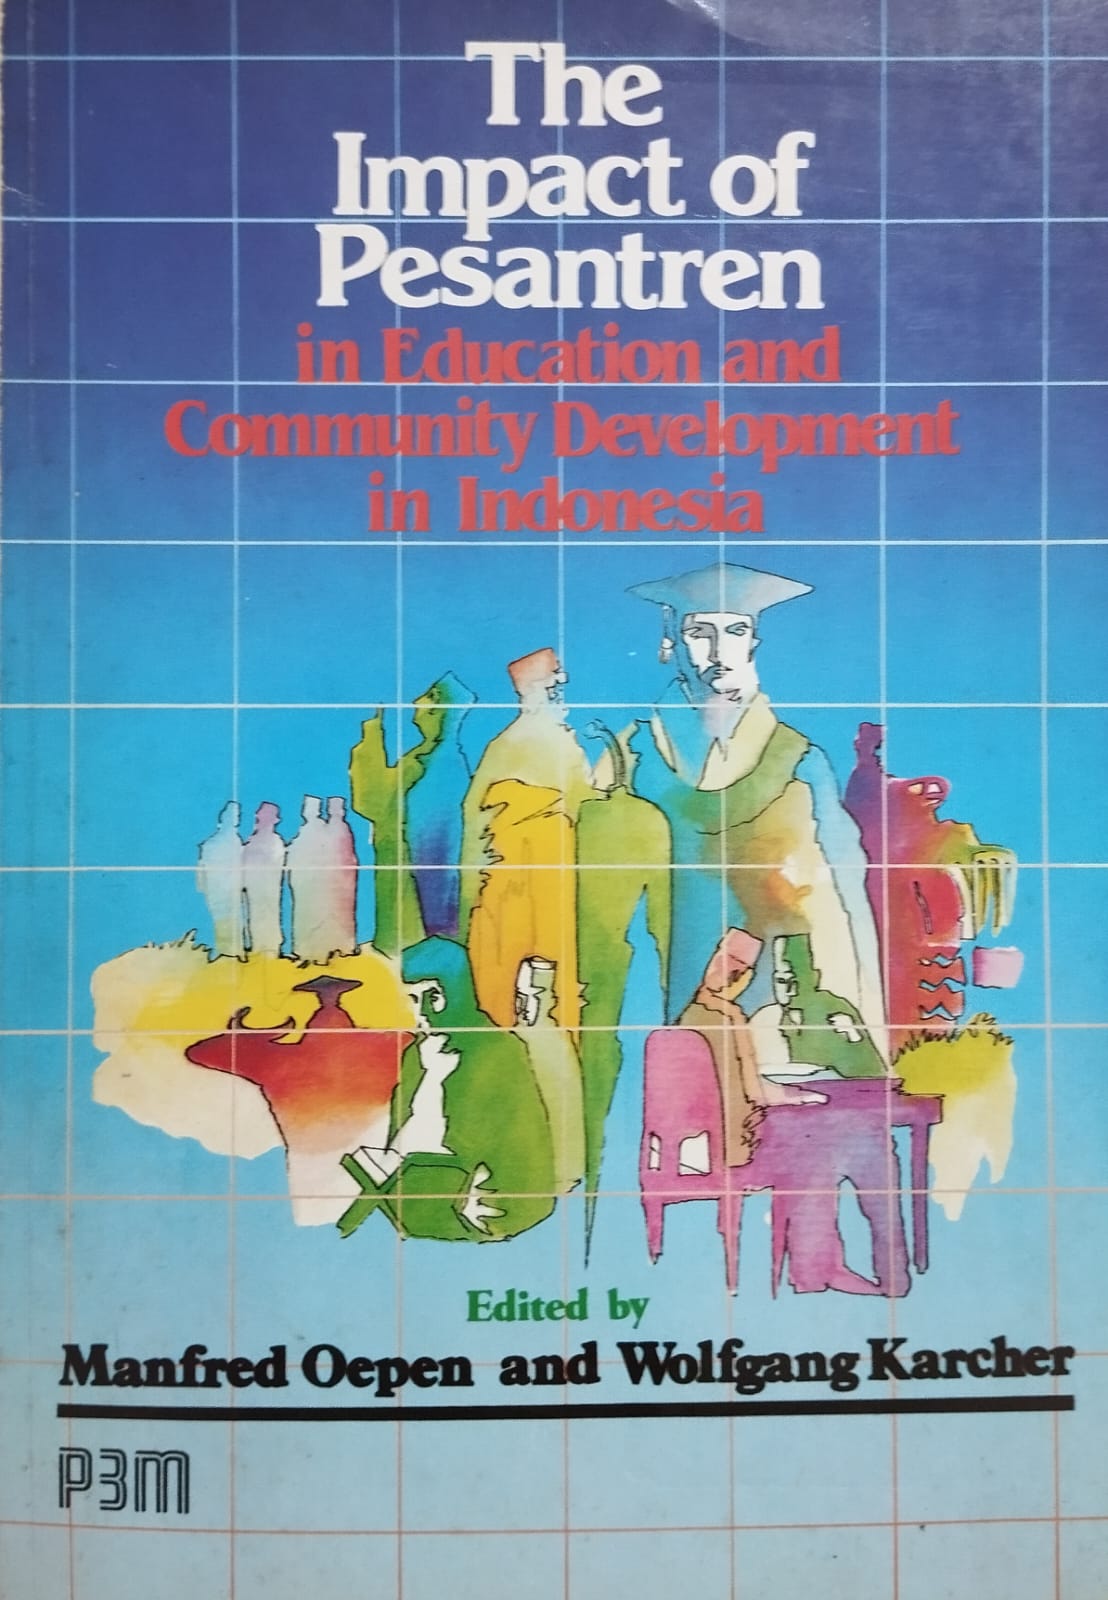 The Impact of Pesantren, in Education and Community Development in Indonesia